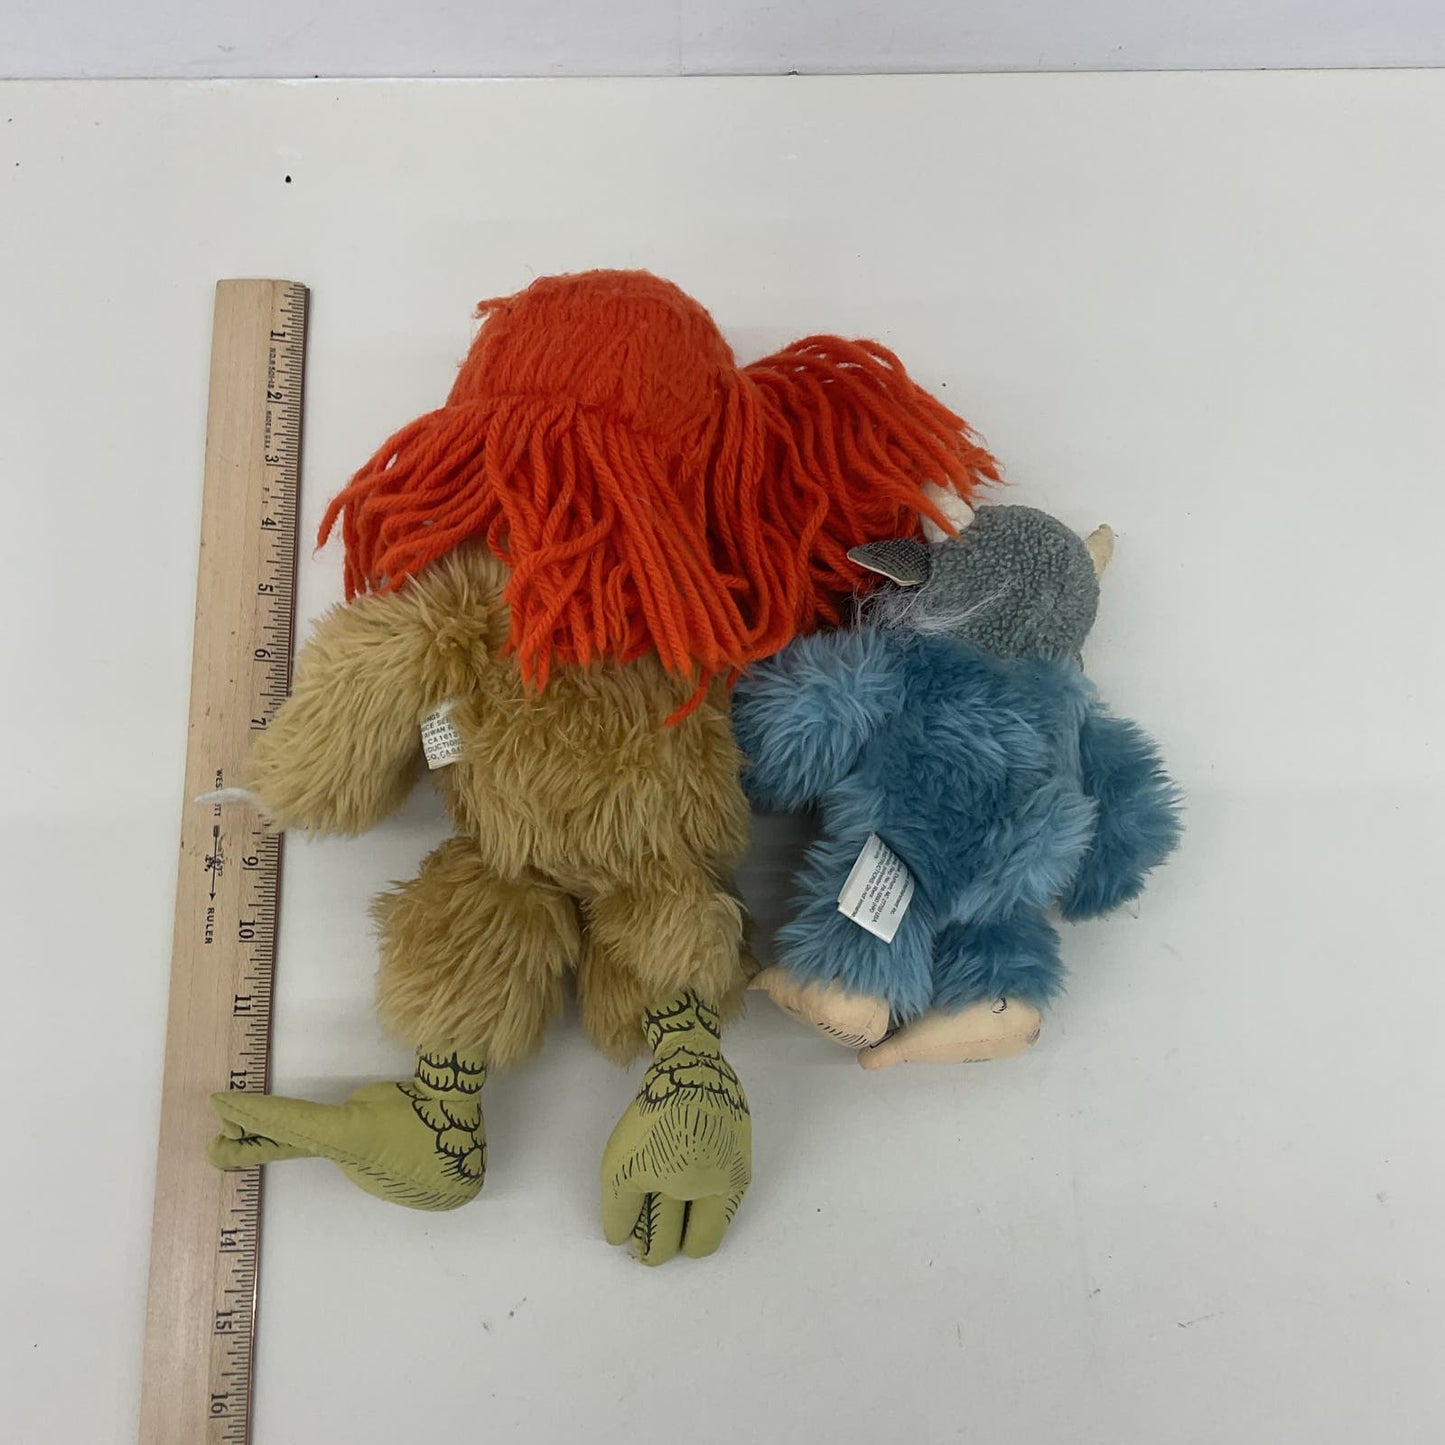 Where the Wild Things Are Character Plush LOT 2 Monsters Cuddly Stuffed Toys